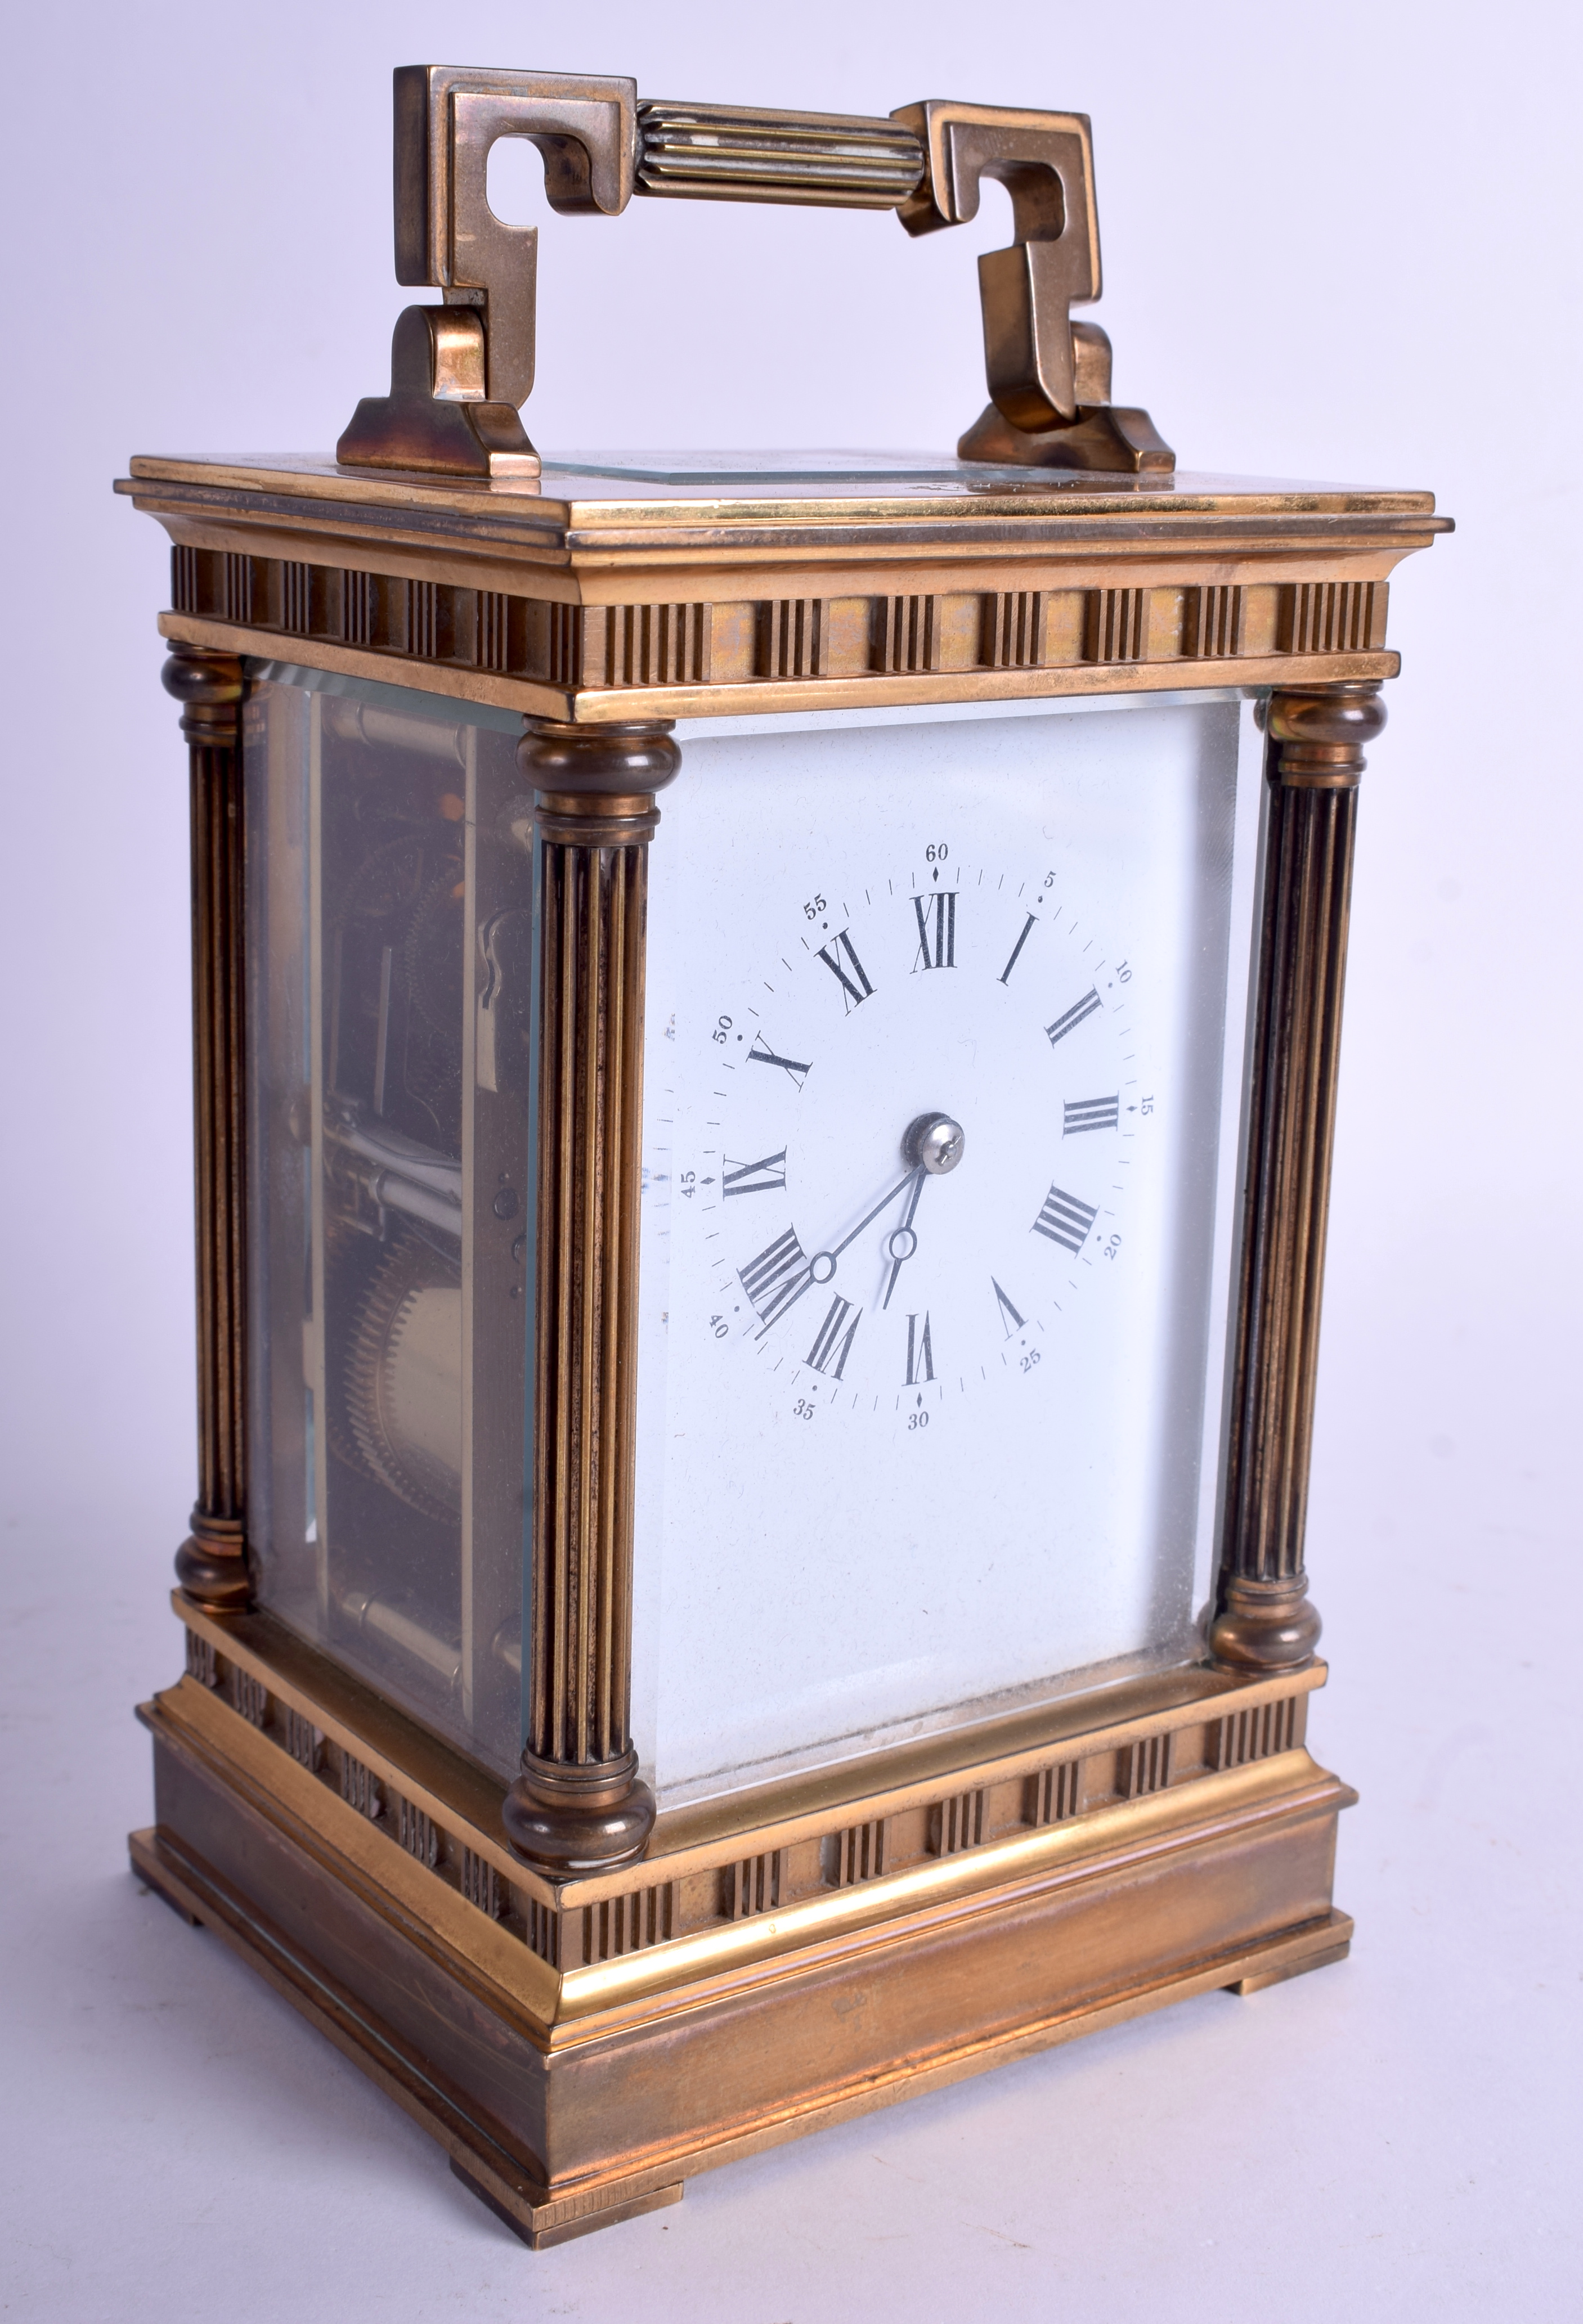 A GOOD FRENCH L'EPPE CARRIAGE CLOCK with classical column supports. 18 cm high inc handle.